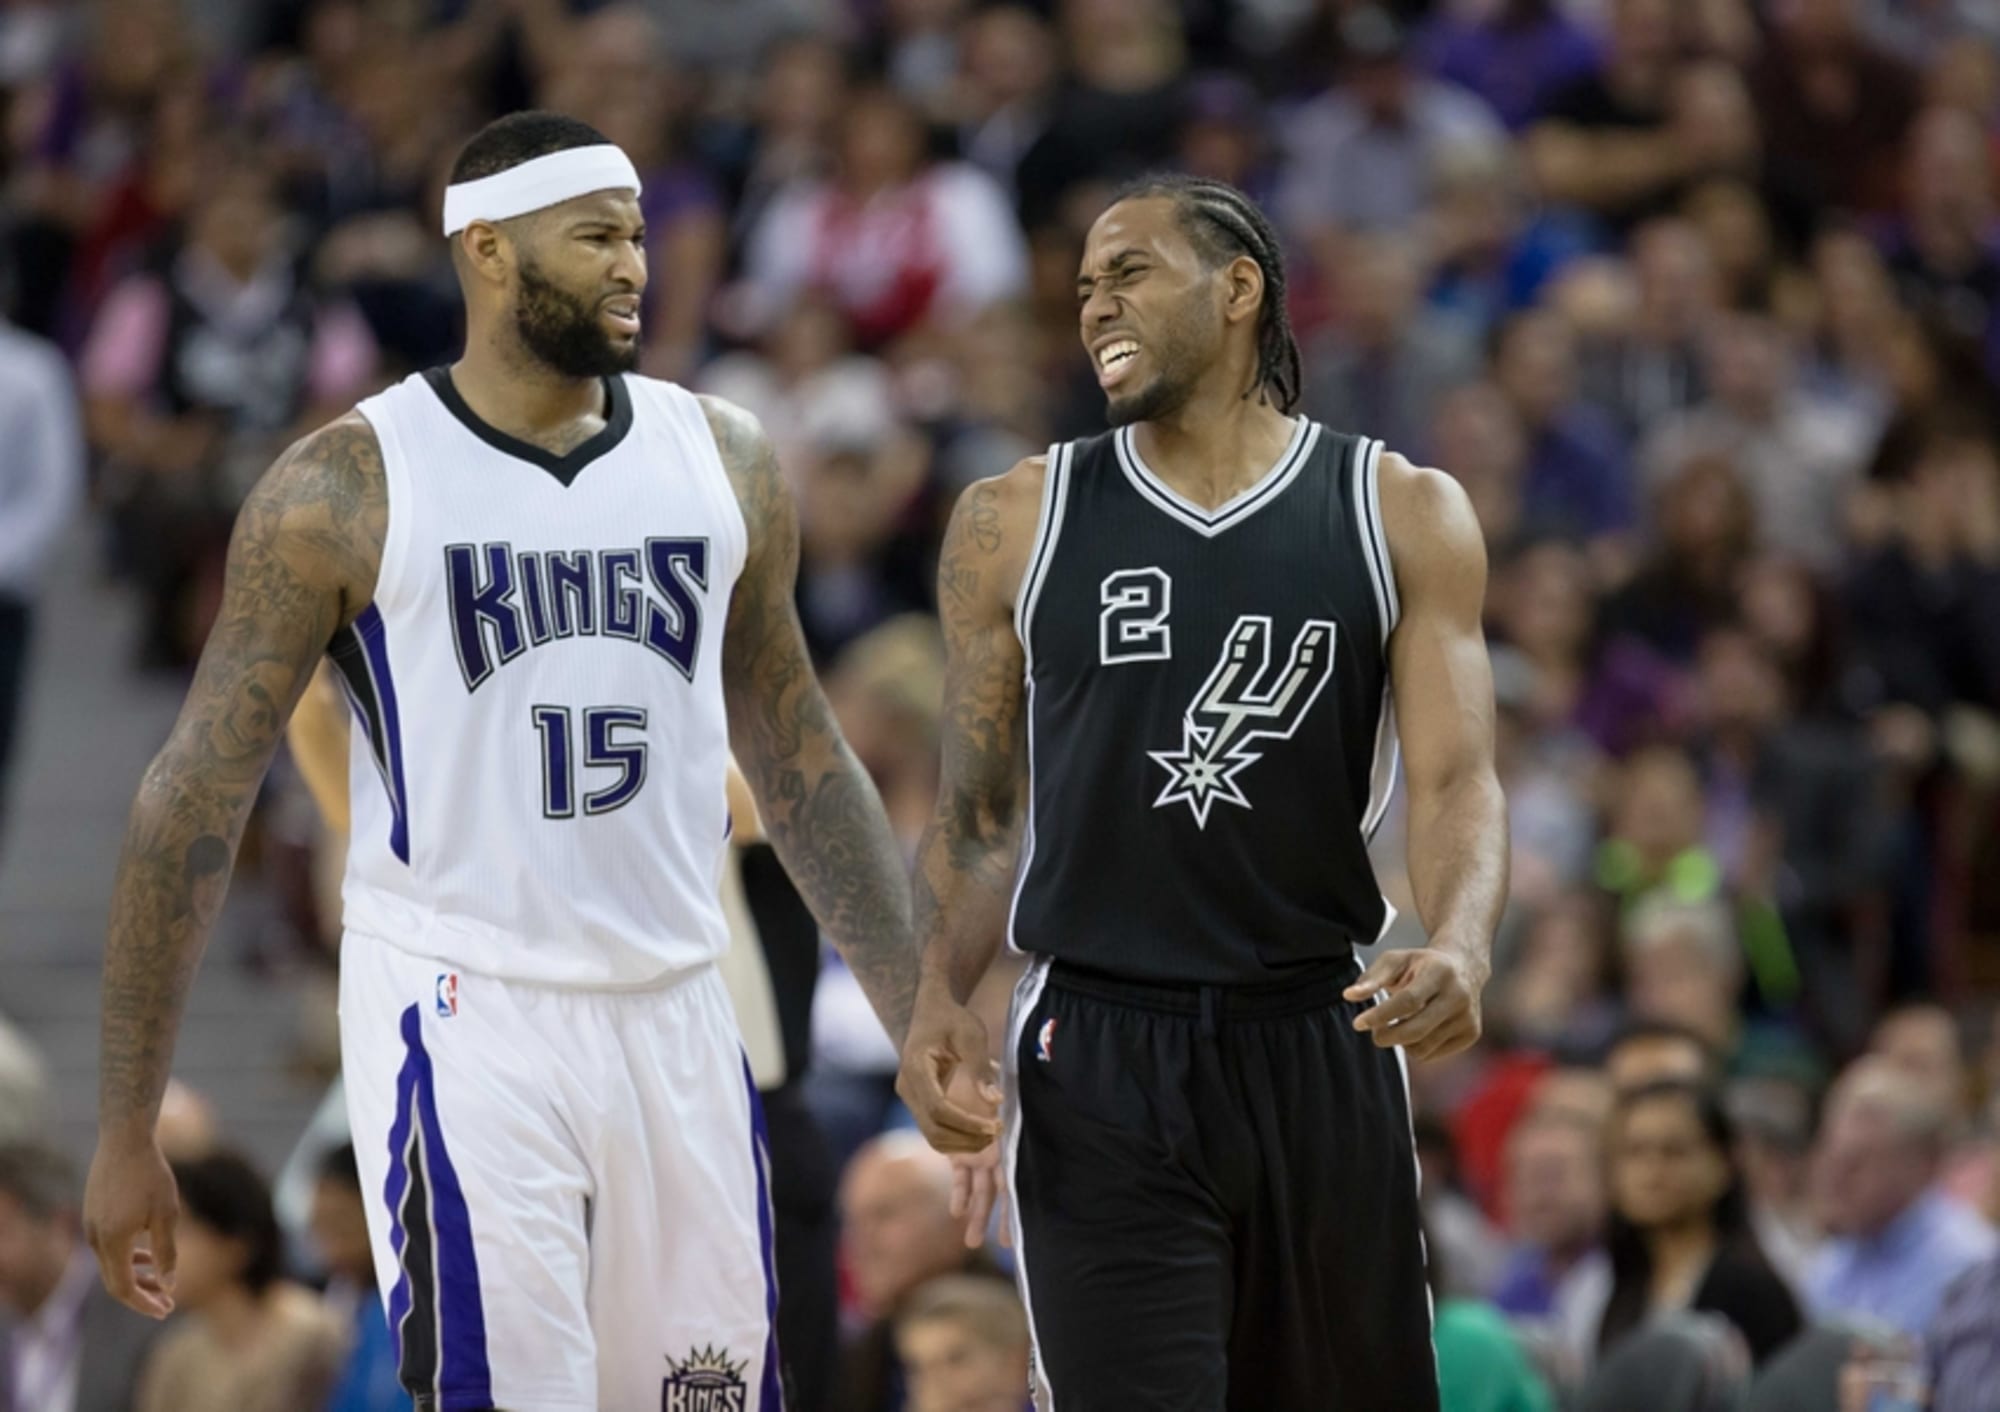 DeMarcus Cousins says his jersey will hang in the rafters when he